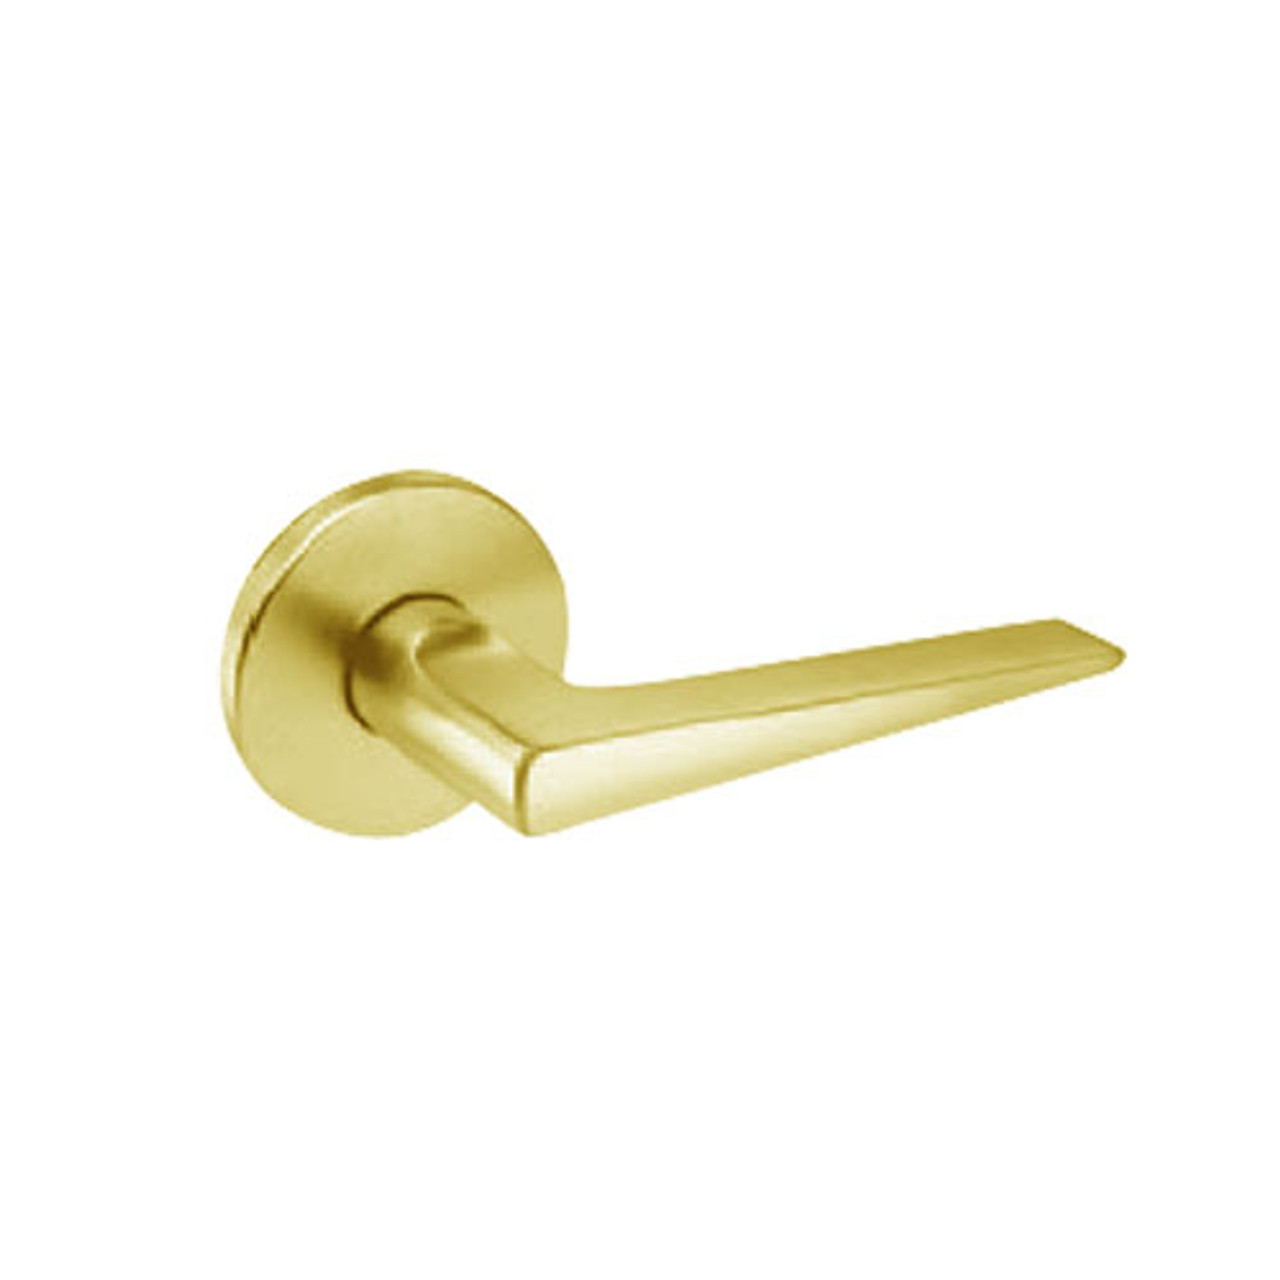 BM38-JL-03 Arrow Mortise Lock BM Series Classroom Security Lever with Javelin Design in Bright Brass